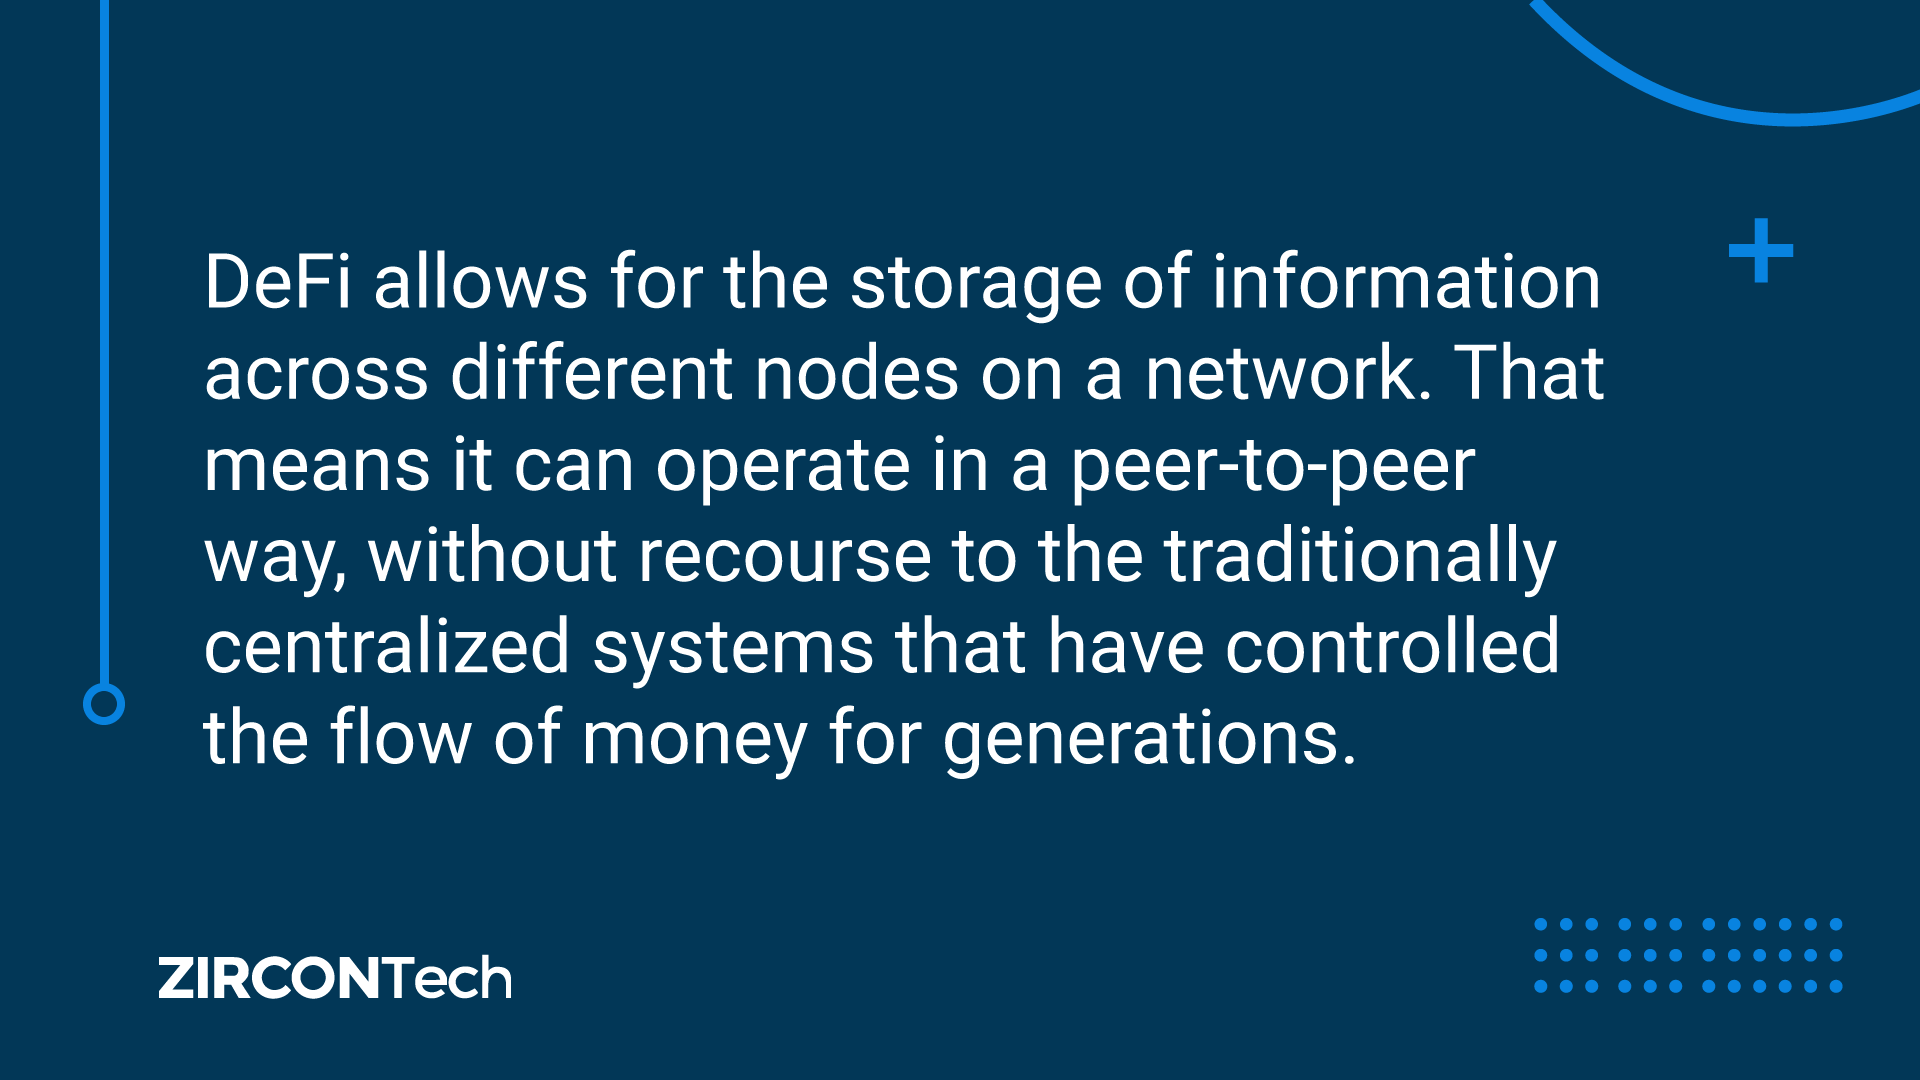 DeFi allows for the storage of information across different nodes on a network. That means it can operate in a peer-to-peer way, without recourse to the traditionally centralized systems that have controlled the flow of money for generations.